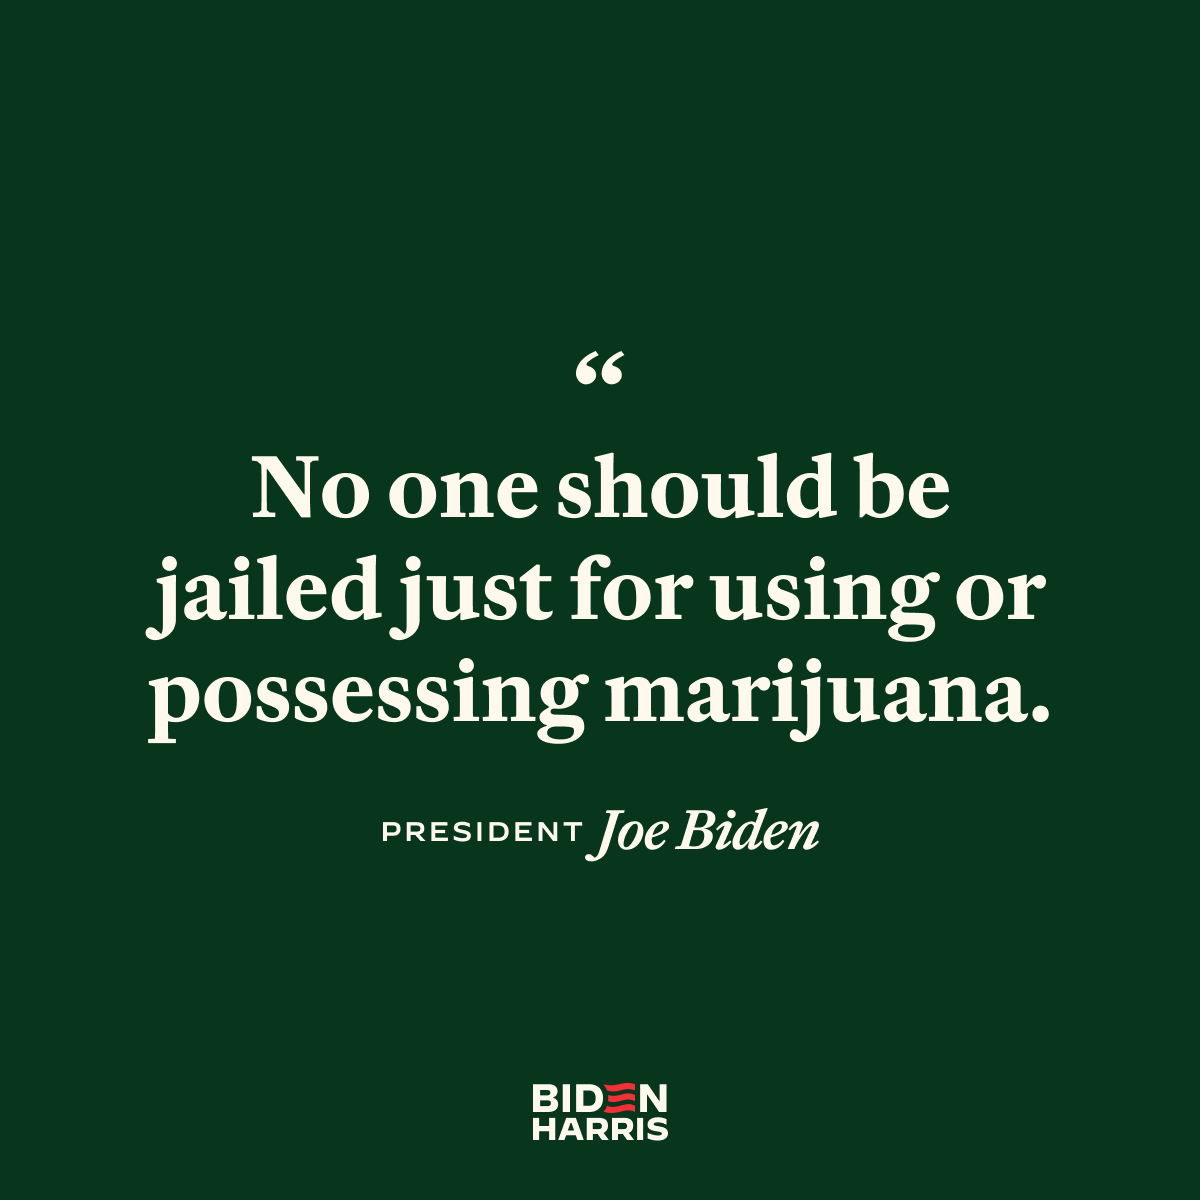 Today, my administration took a major step to reclassify marijuana from a Schedule I drug to a Schedule III drug. It’s an important move toward reversing longstanding inequities.